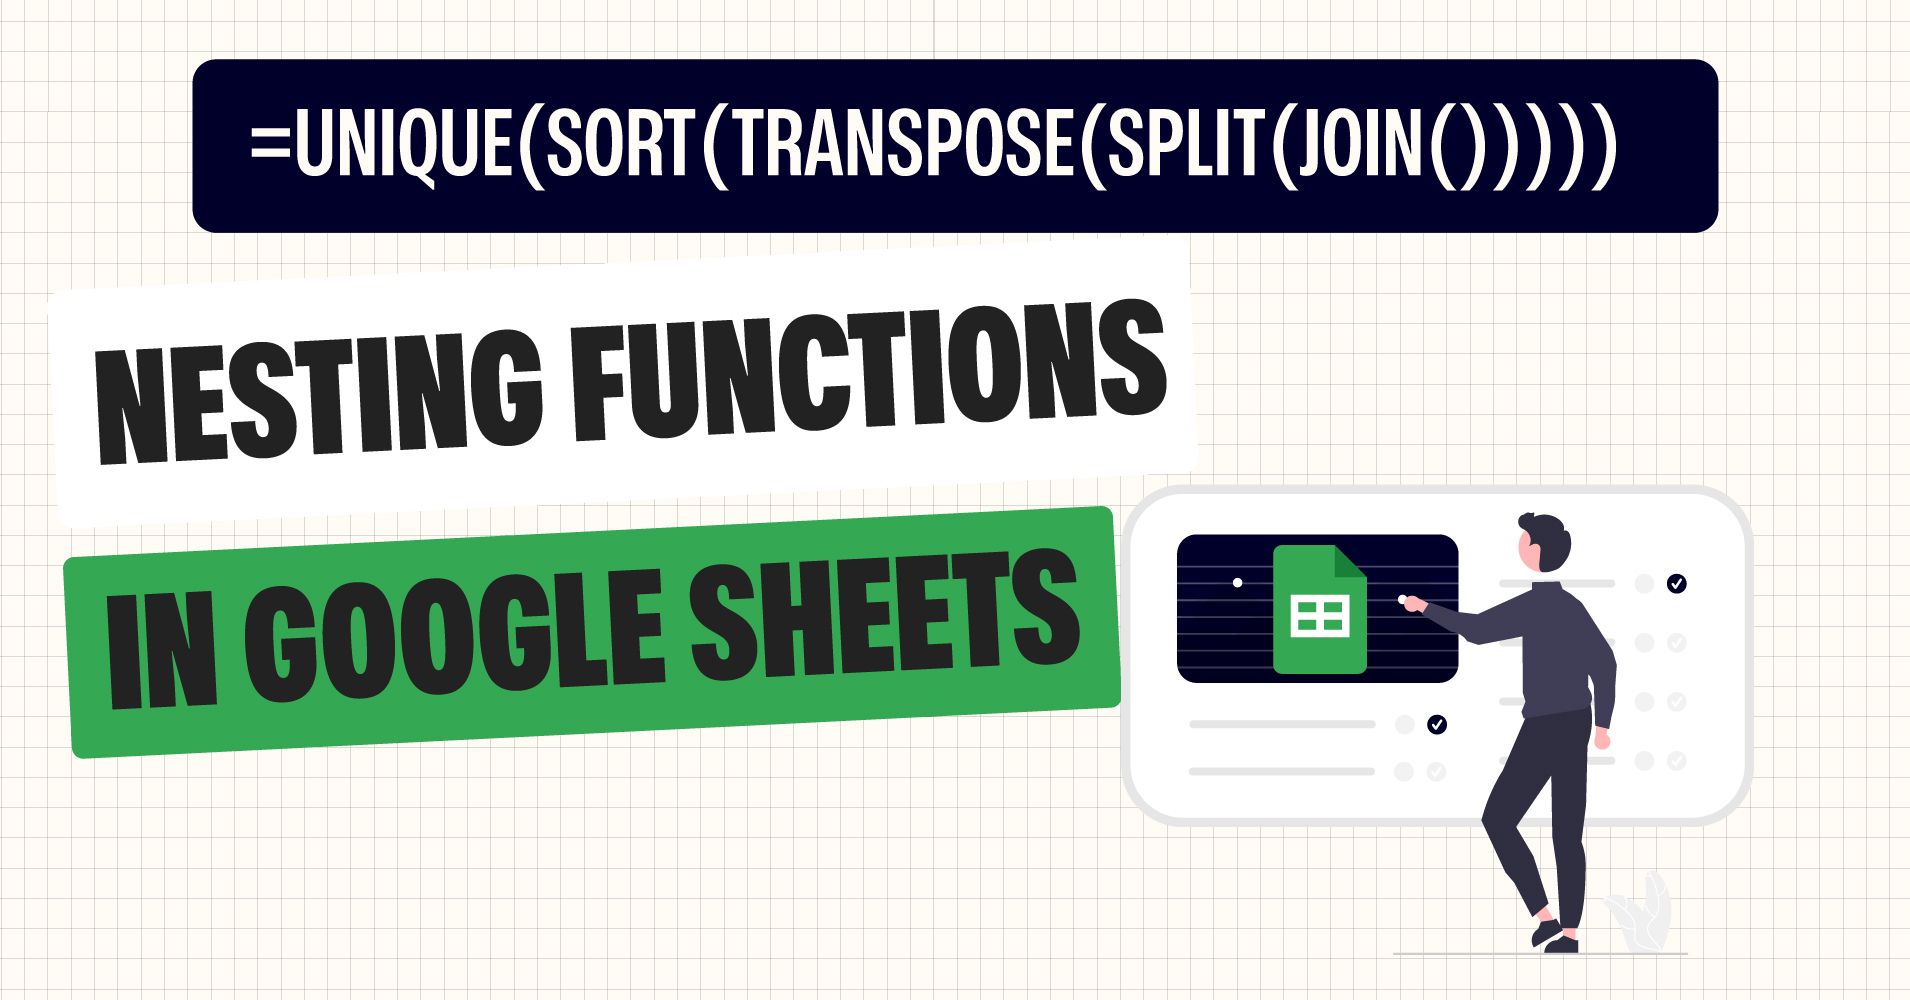 How to Use Nested Functions in Google Sheets